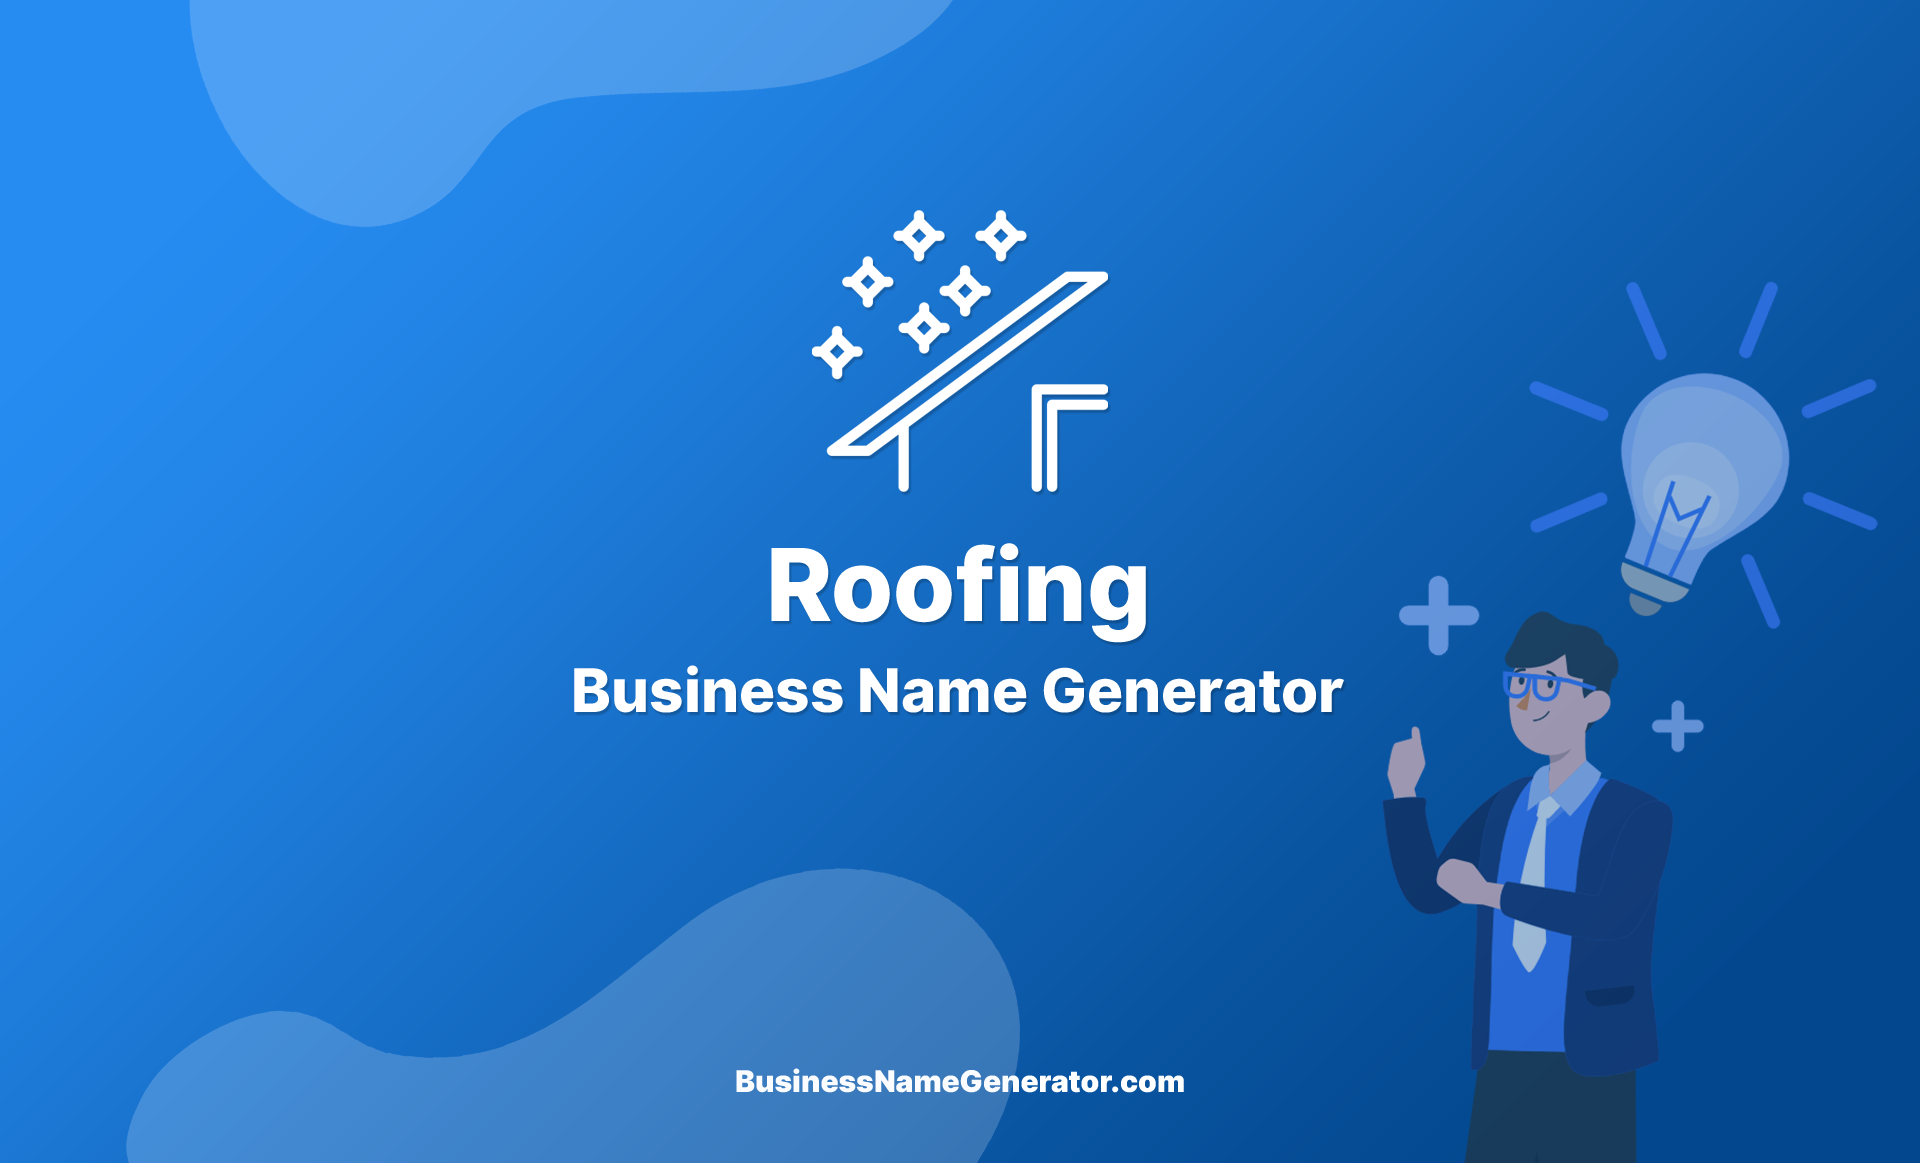 Roofing Business Name Generator Guide & Ideas